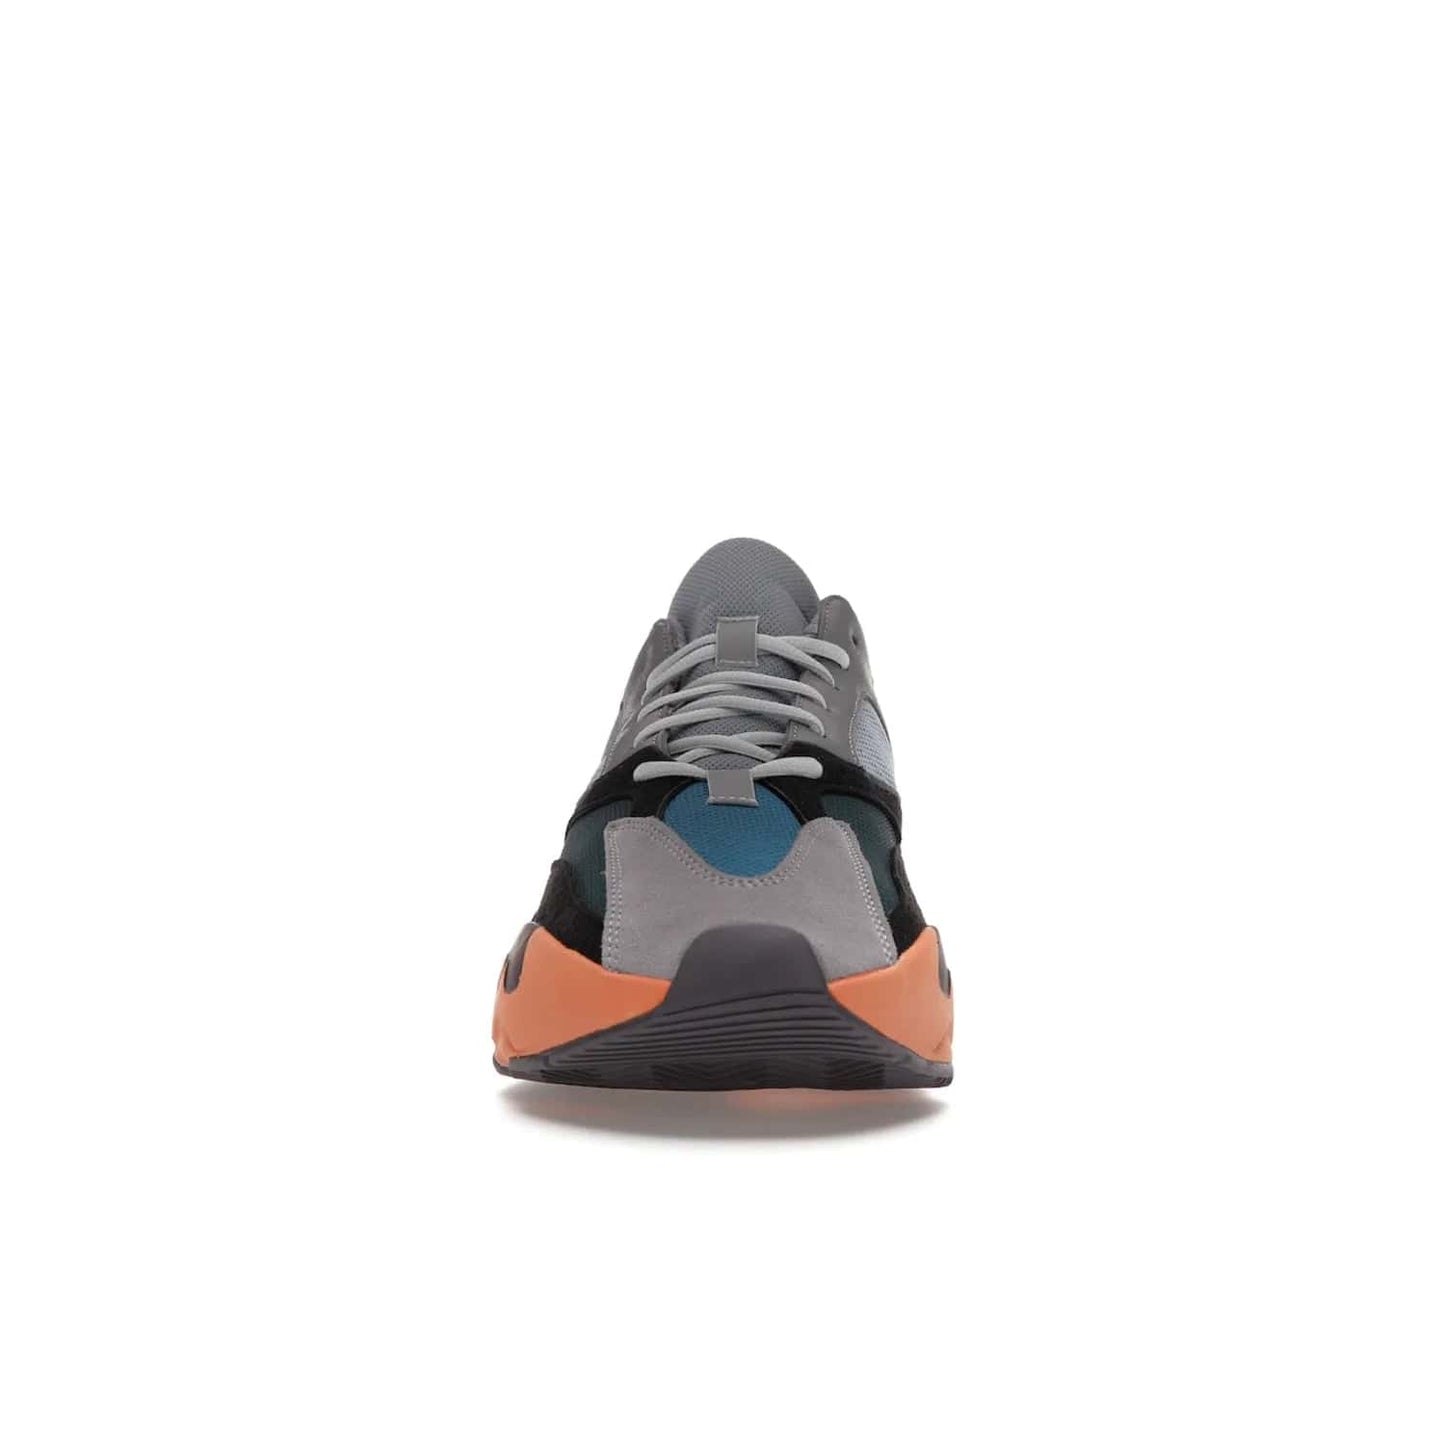 adidas Yeezy Boost 700 Wash Orange - Image 10 - Only at www.BallersClubKickz.com - Introducing the adidas Yeezy Boost 700 Wash Orange. Unique grey leather, suede, mesh upper and teal panels with a chunky Wash Orange Boost midsole. Release October 2021, make a statement today!